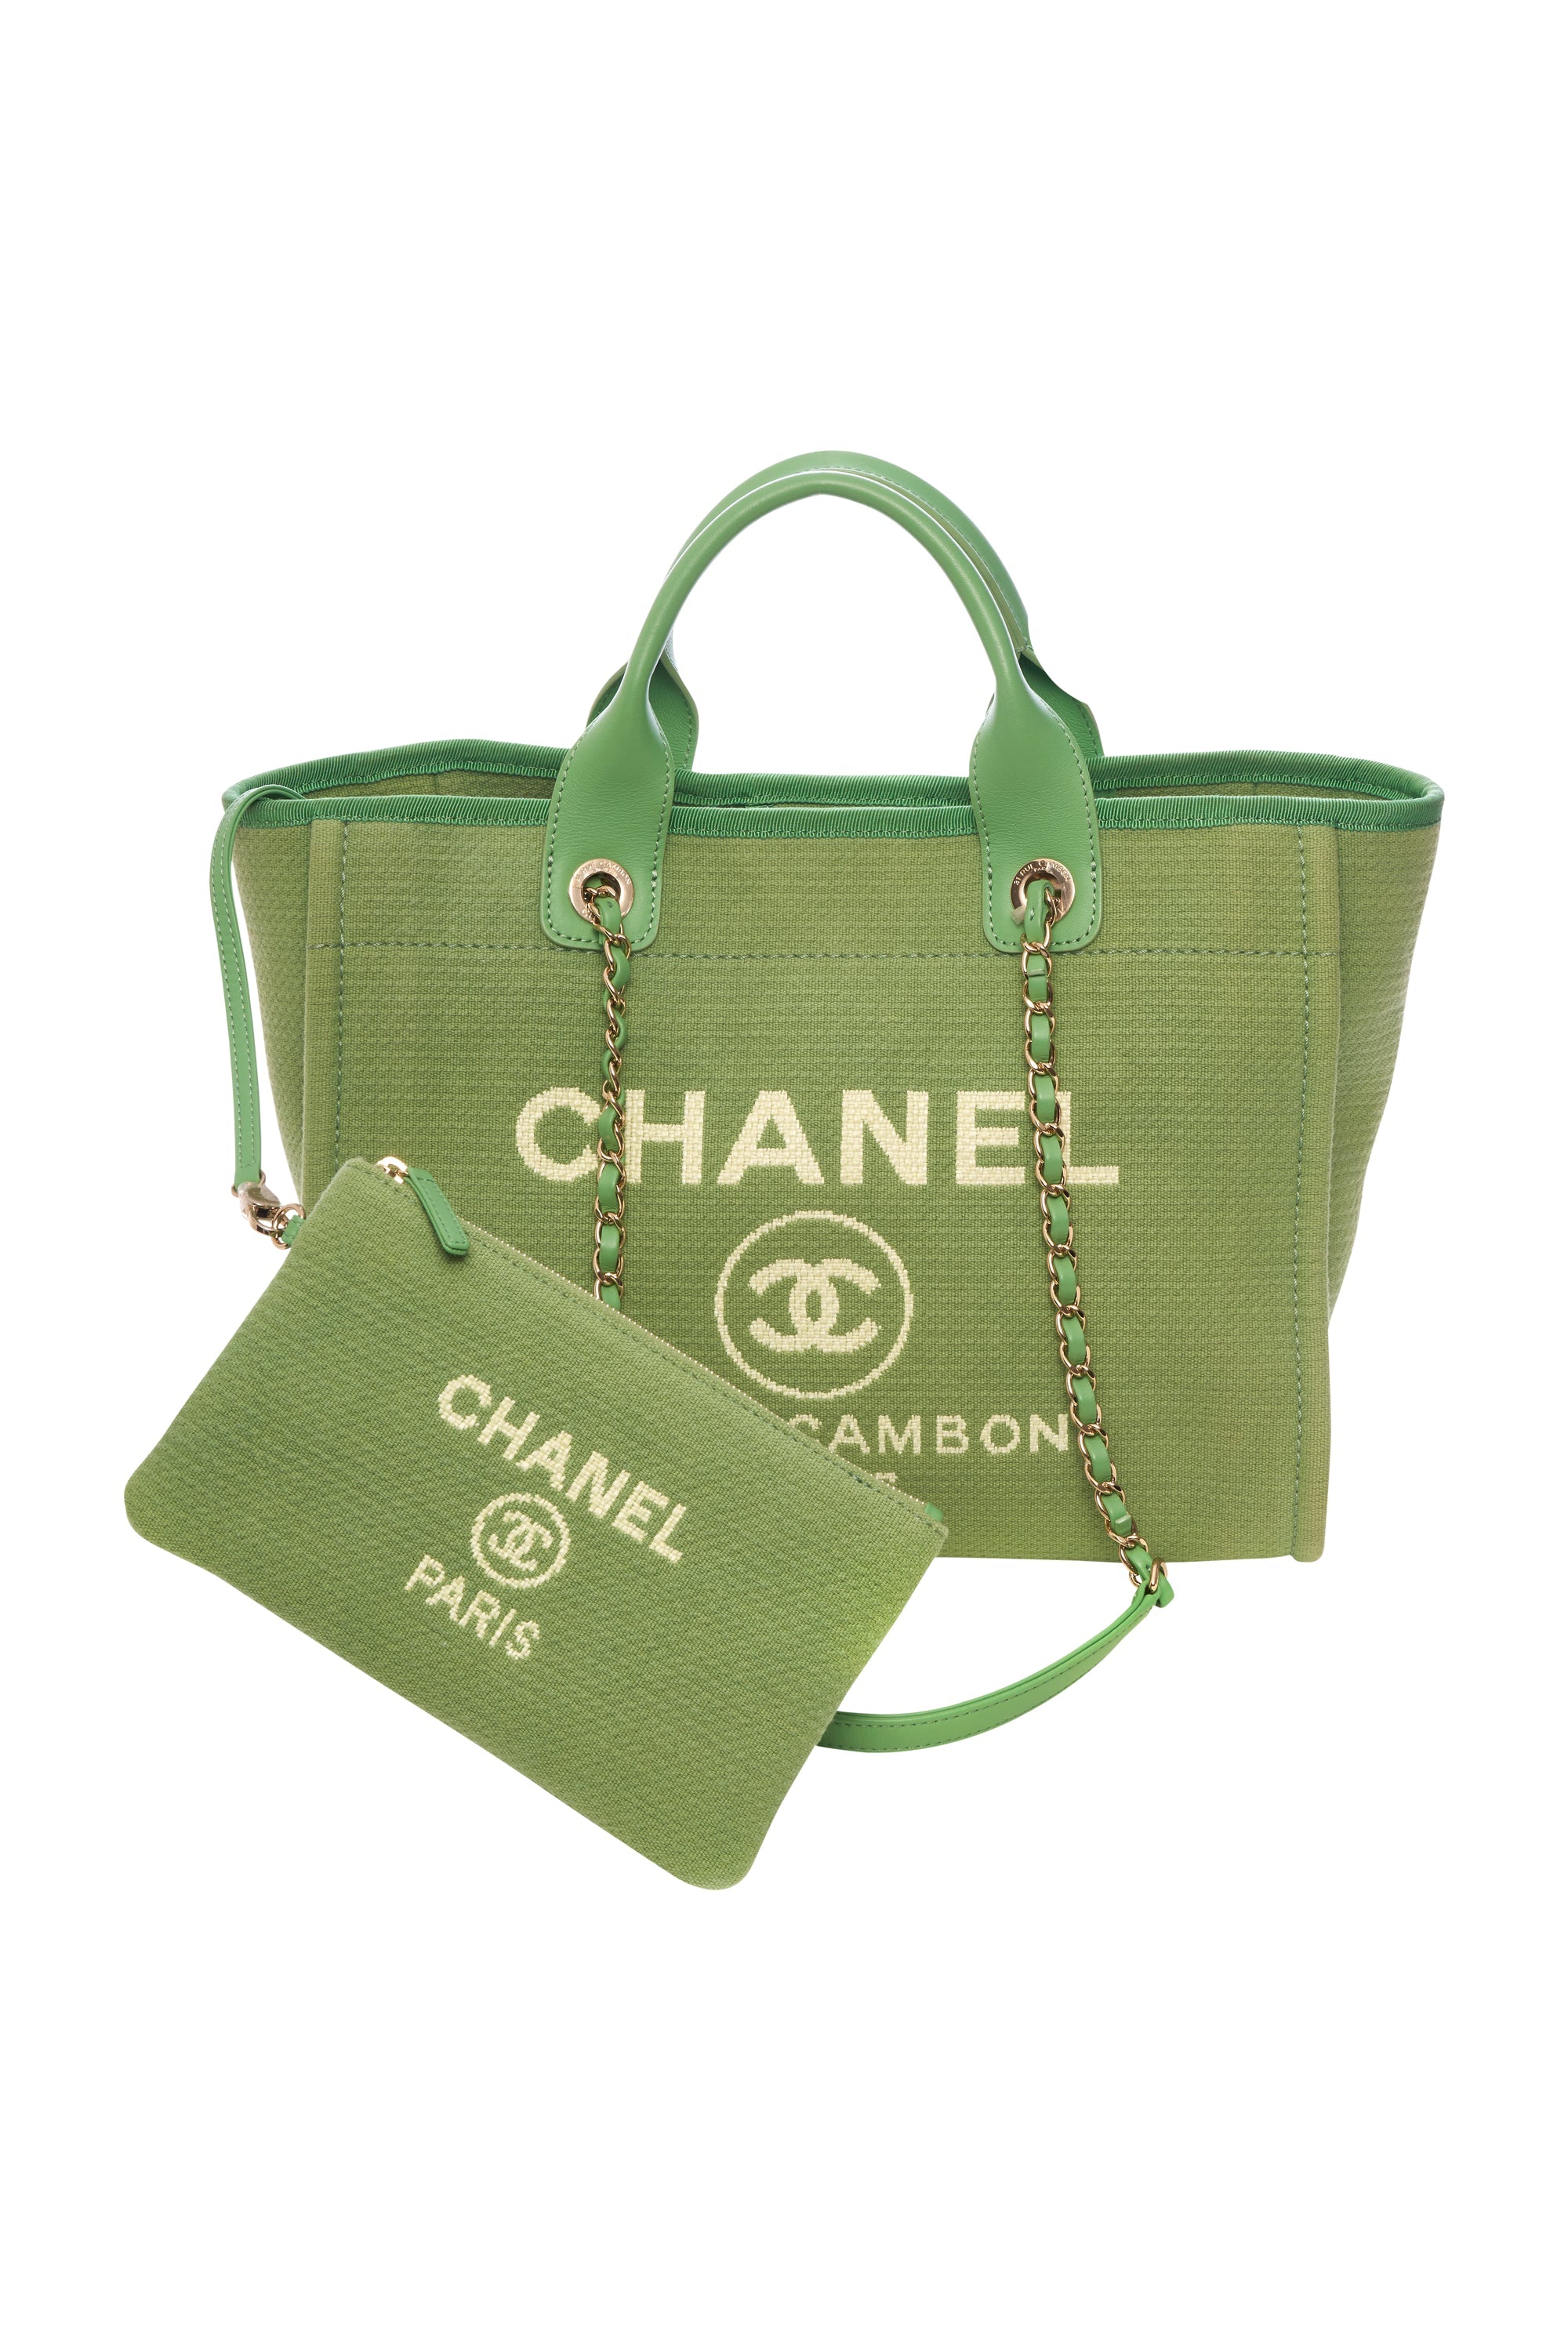 Chanel Green Deauville Tote Bag